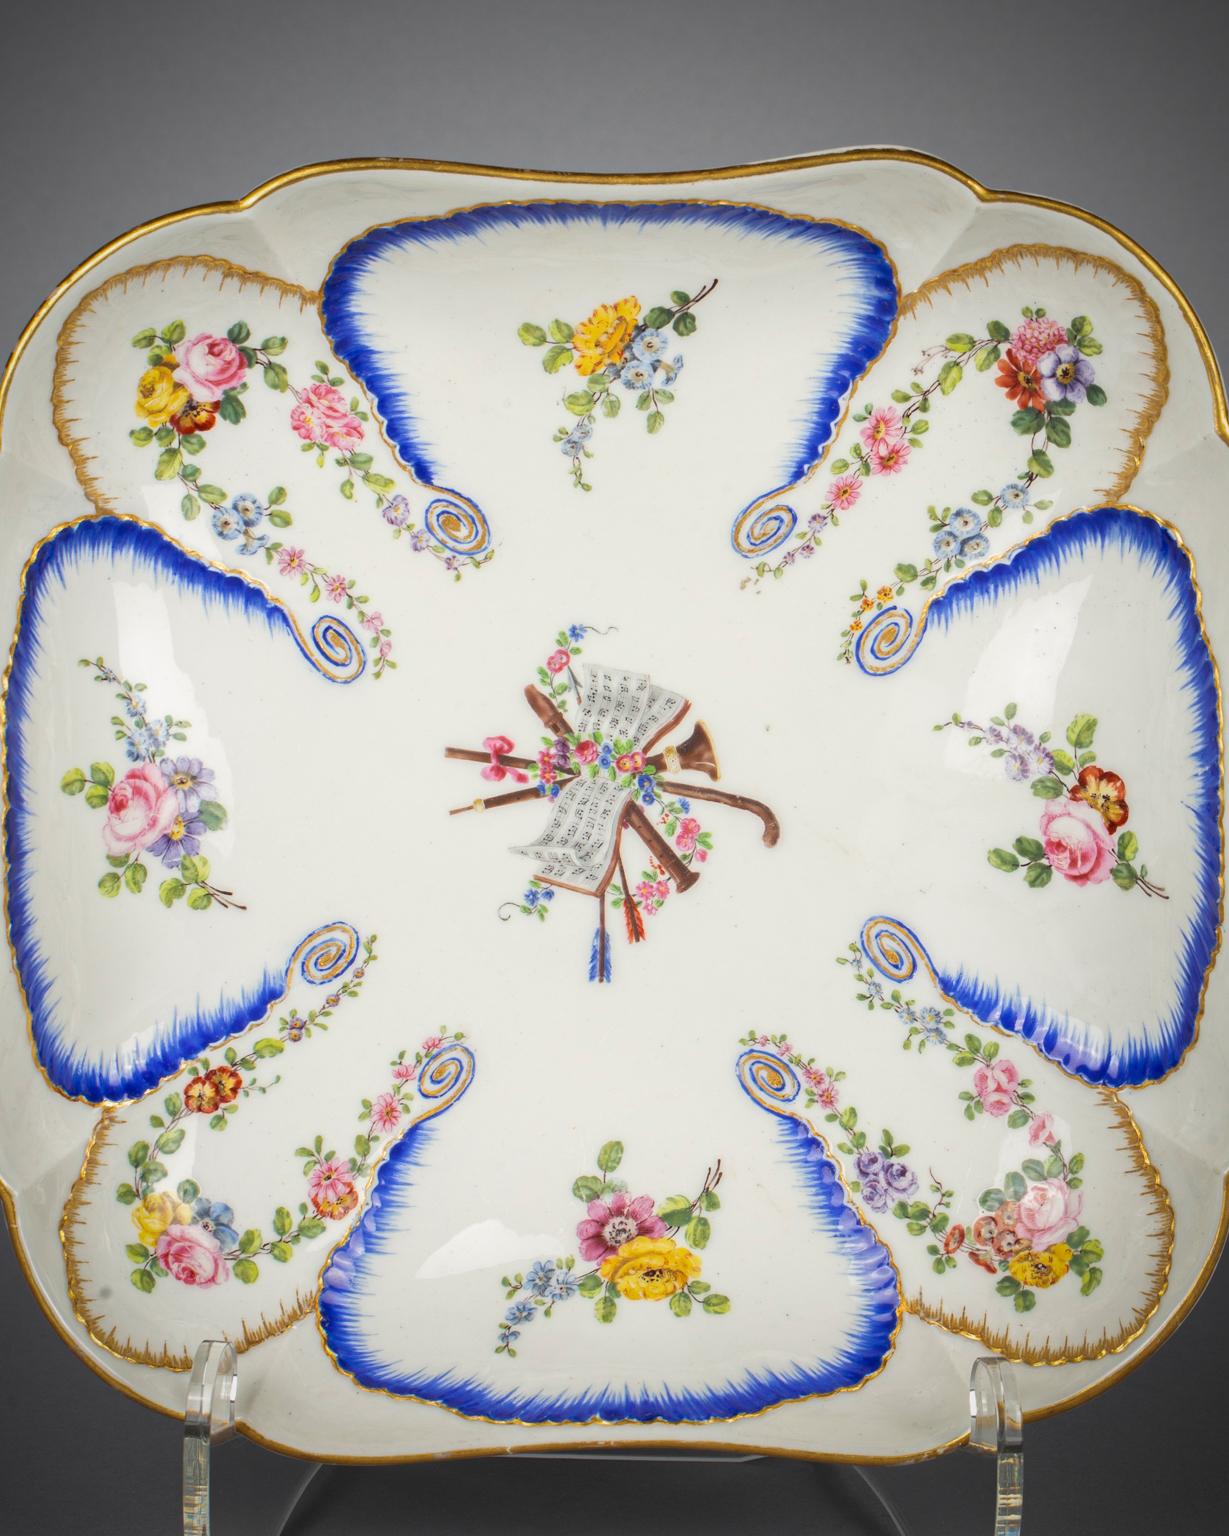 With fluted decoration in the Feuille de choux (cabbage leaf) pattern. Each leaf meticulously painted with a floral bouquet, the center painted with a musical score, instrument and trophy. Painter: Claude Couturier.